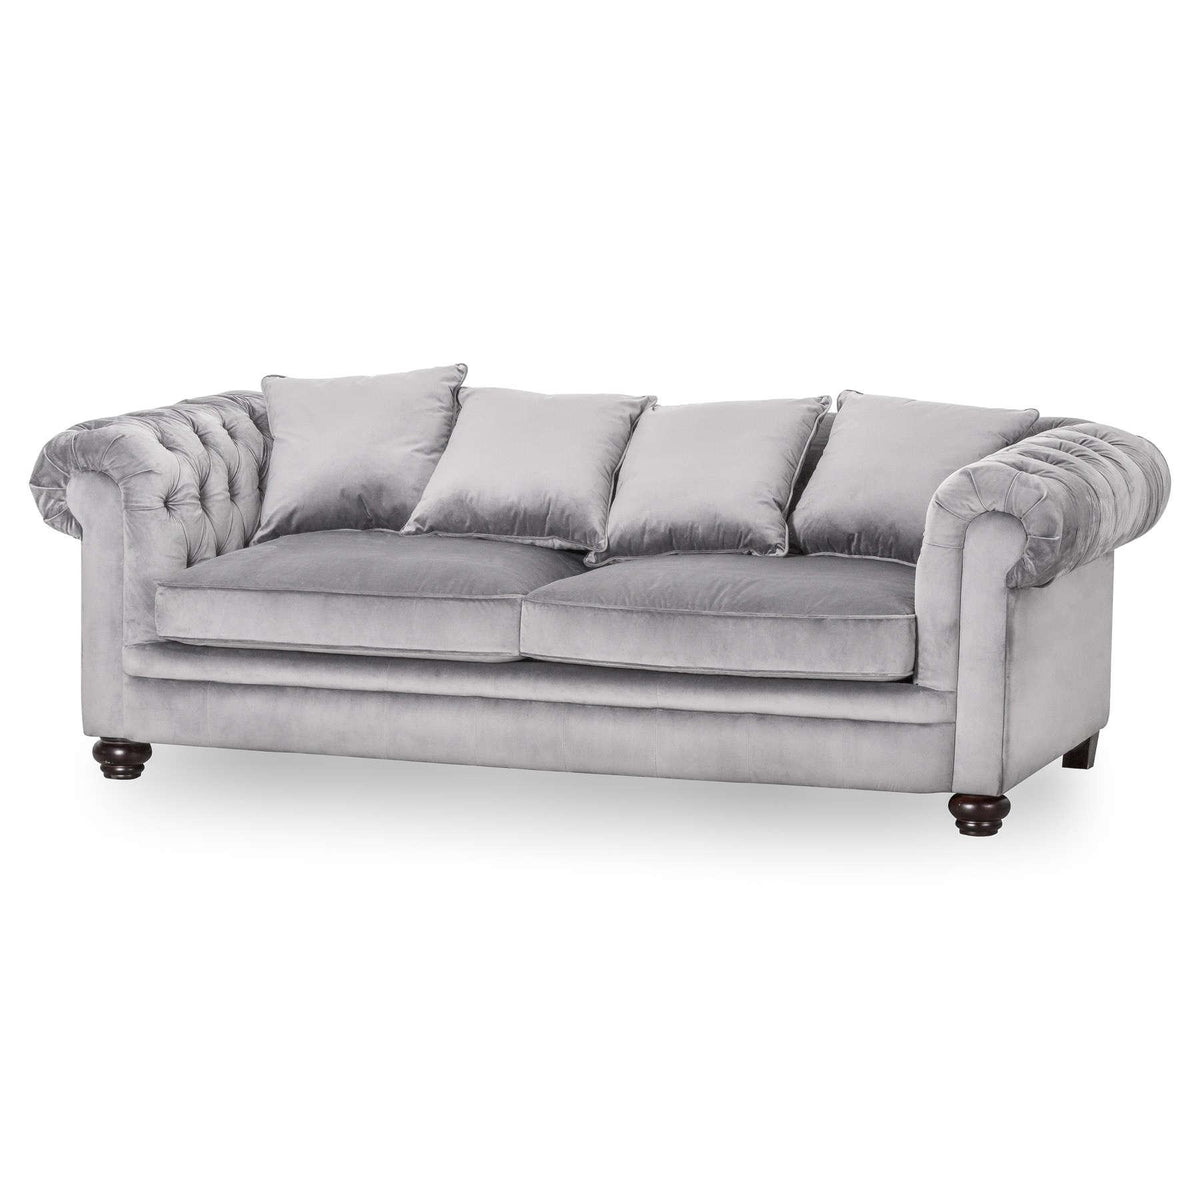 Grey Velvet Large Chesterfield Three Seater Sofa - Vookoo Lifestyle